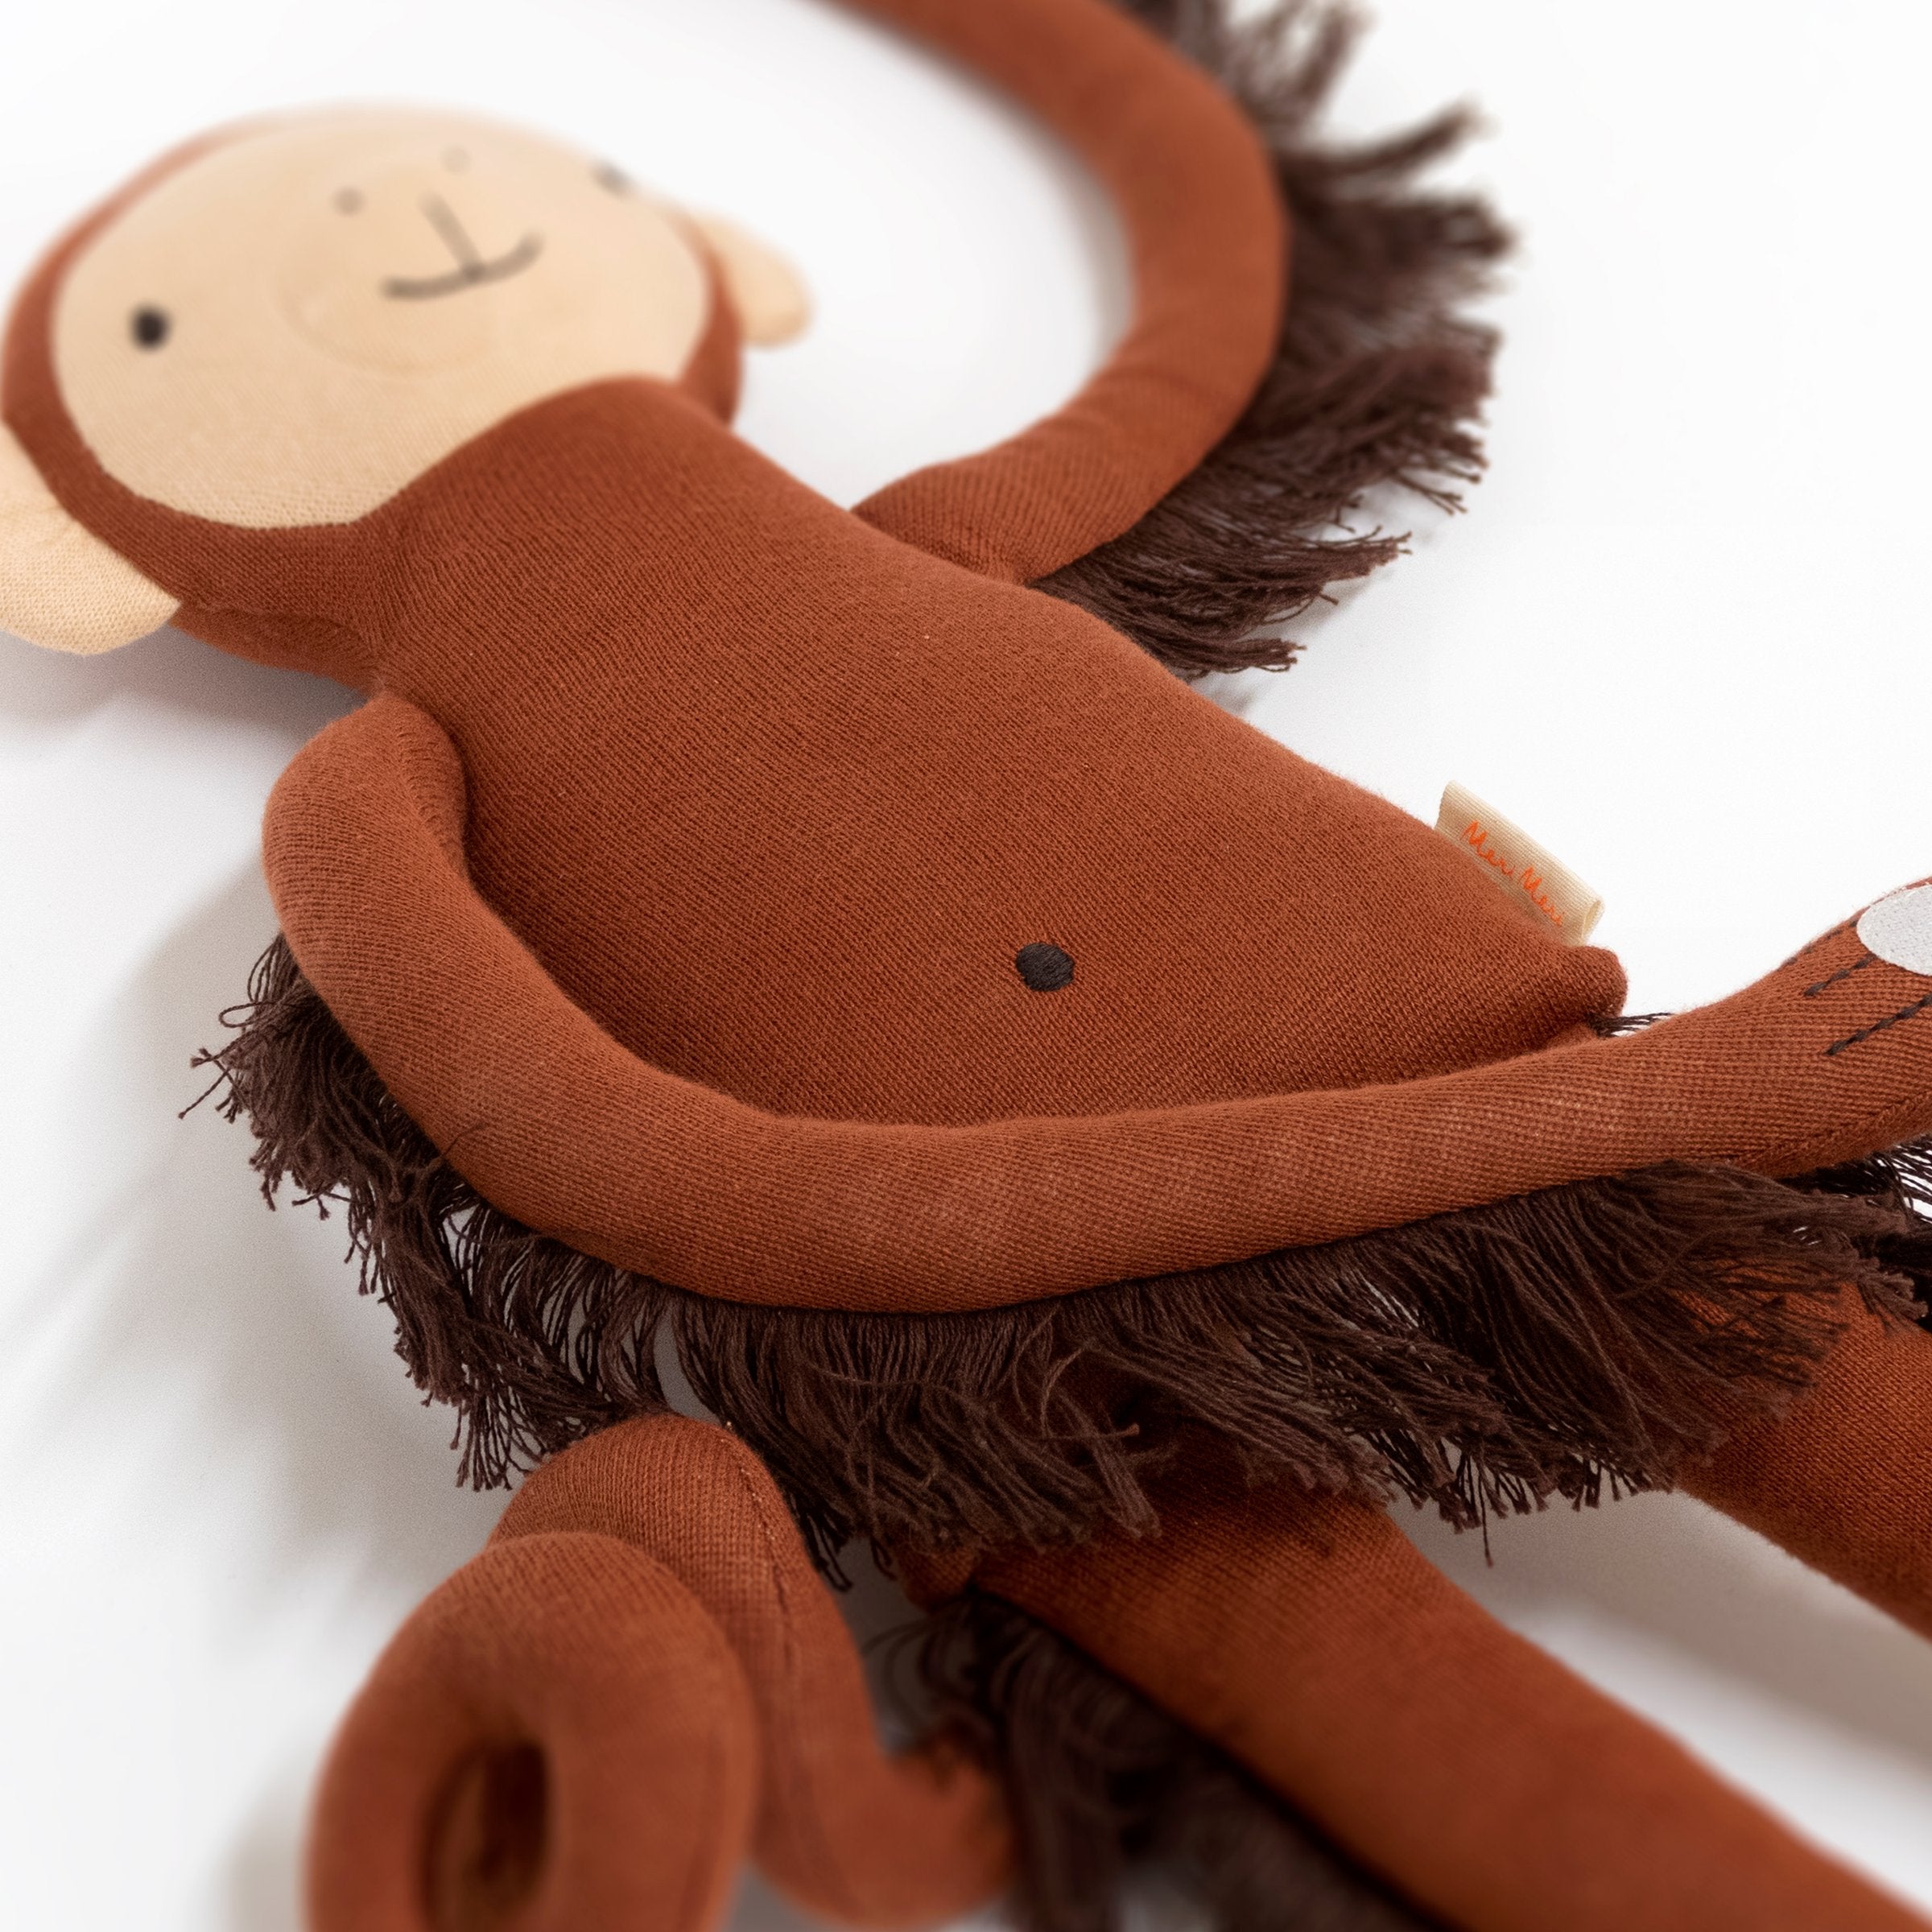 Our orgnaic cotton monkey soft toy is the perfect newborn baby gift.